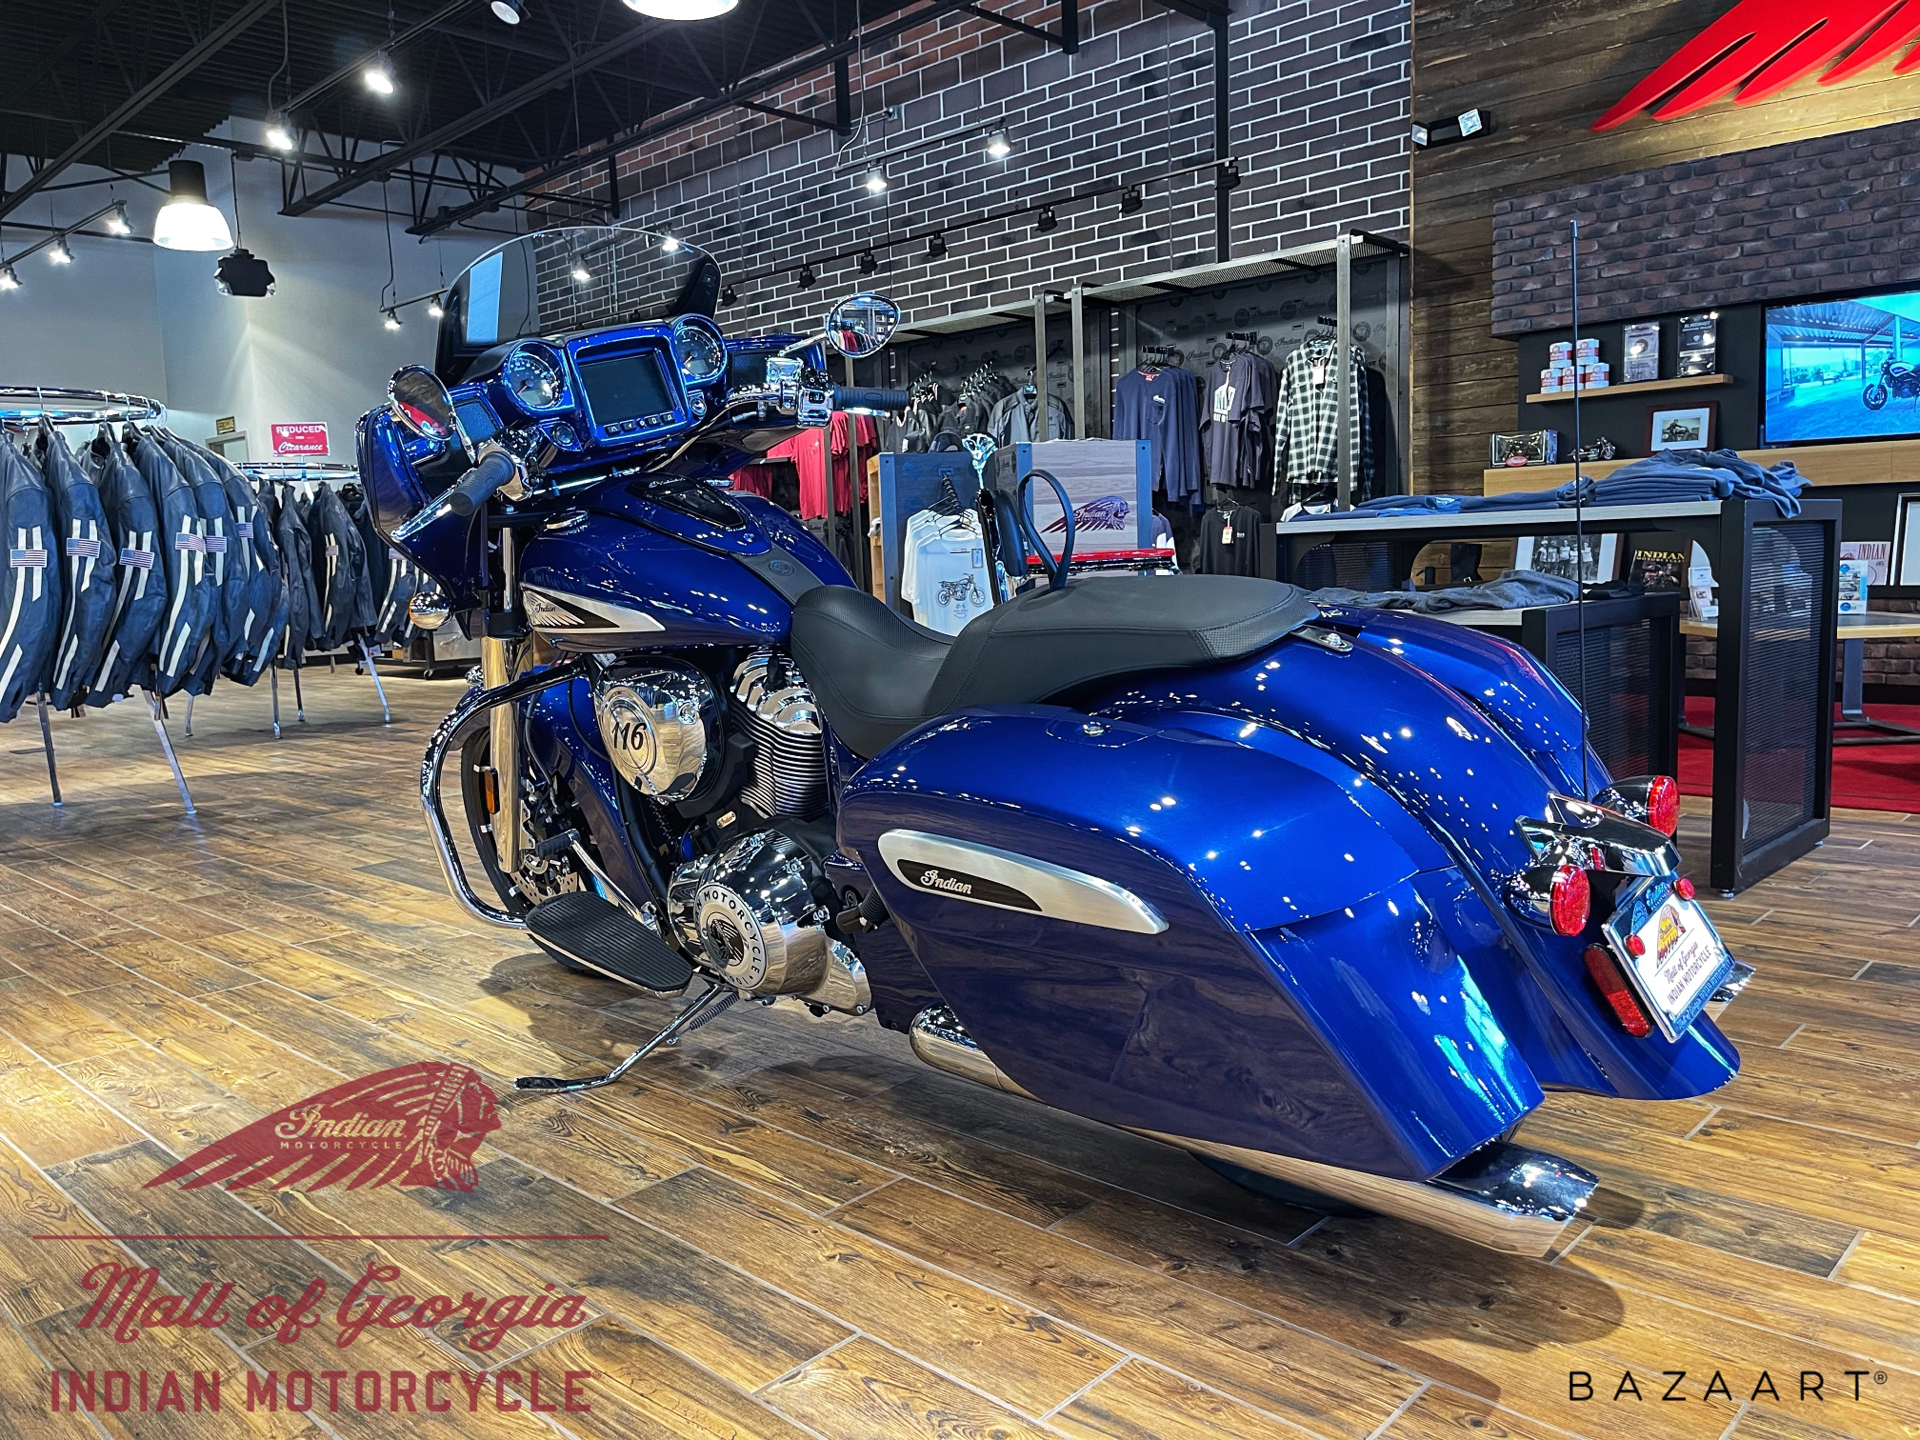 2022 Indian Chieftain® Limited in Buford, Georgia - Photo 6